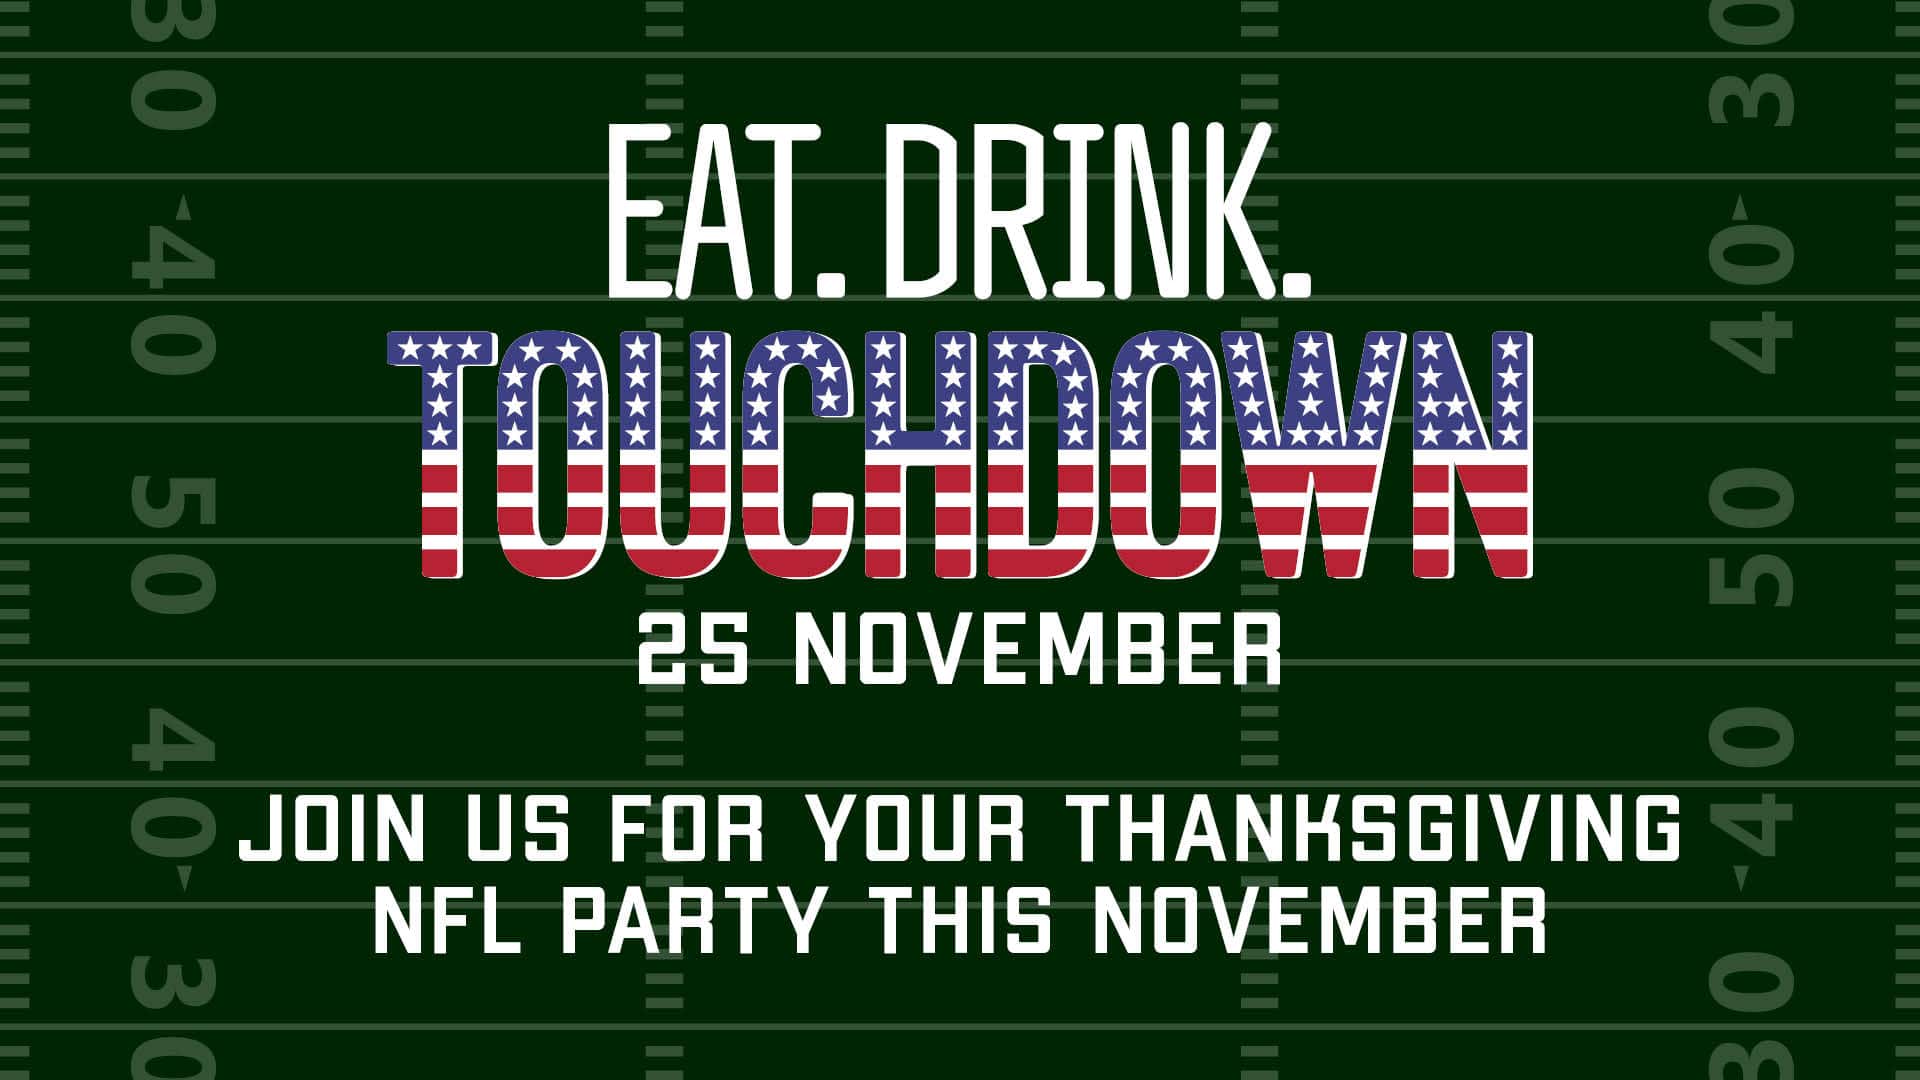 NFL Thanksgiving Fixtures – Find a Pub to Watch NFL